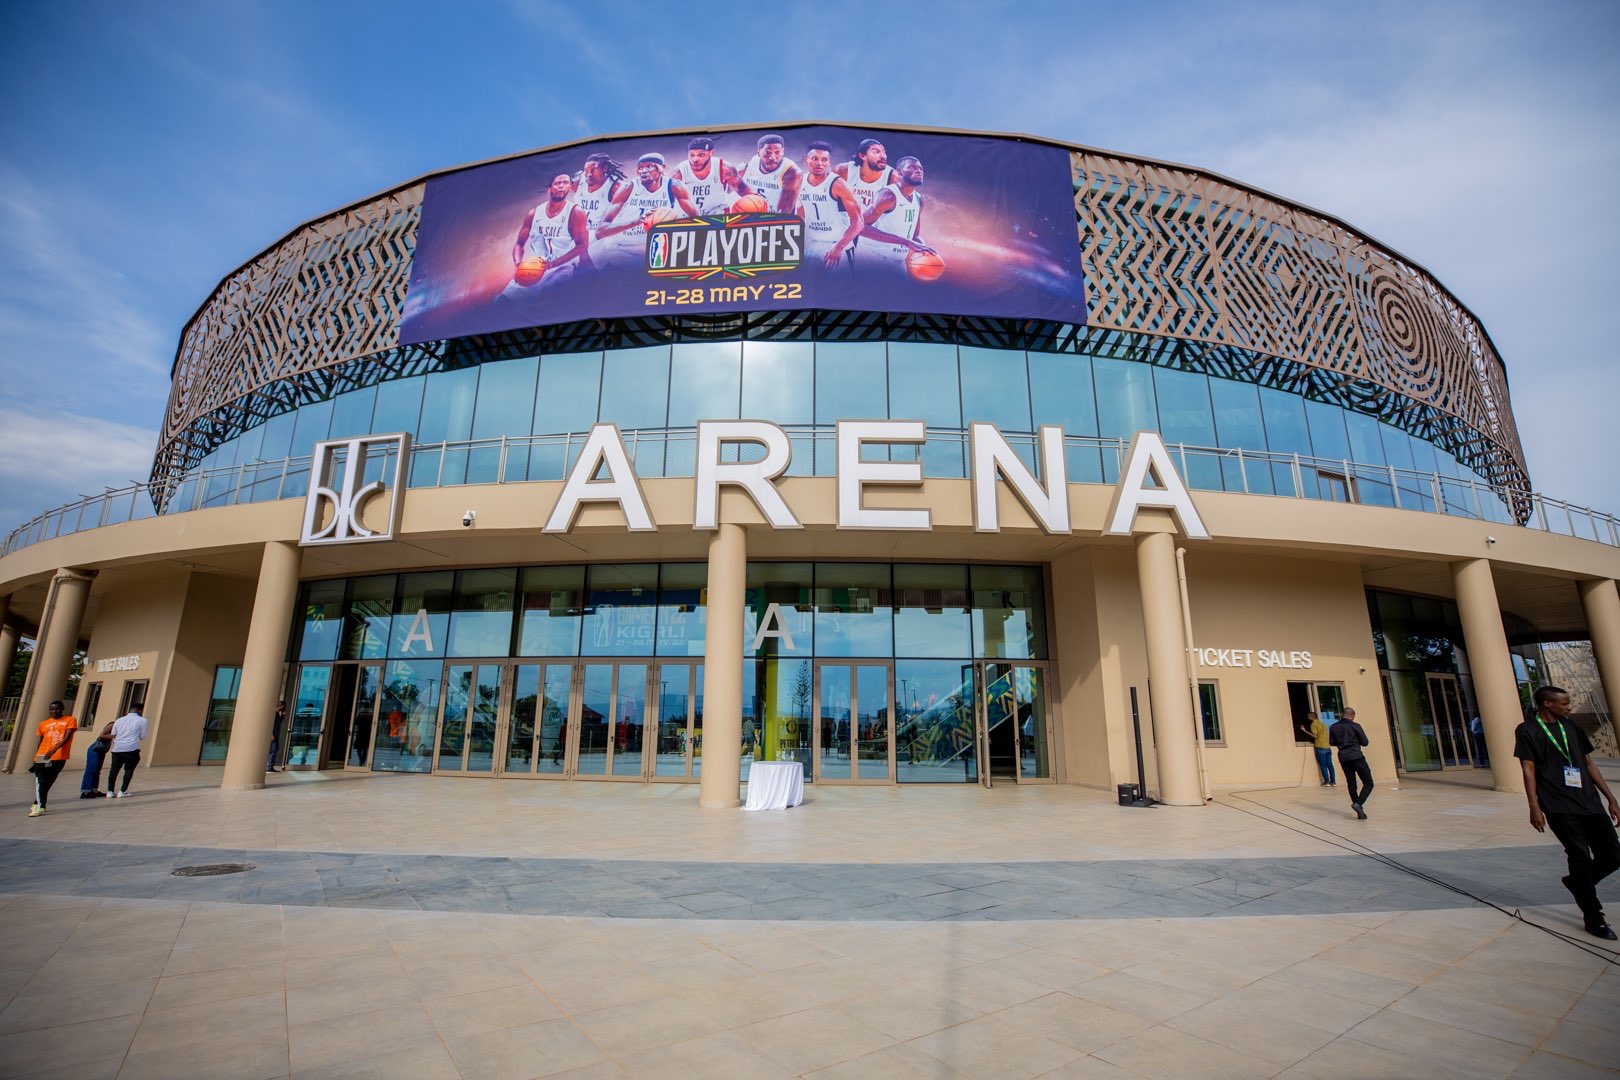 Kigali Arena rebranded to u2018BK Arenau2019 earlier this week in a USD7 million deal with the Bank of Kigali group. The 10,000-seat facility has hosted finals of the Basketball Africa League in 2021 and 2022. Photo: Courtesy.